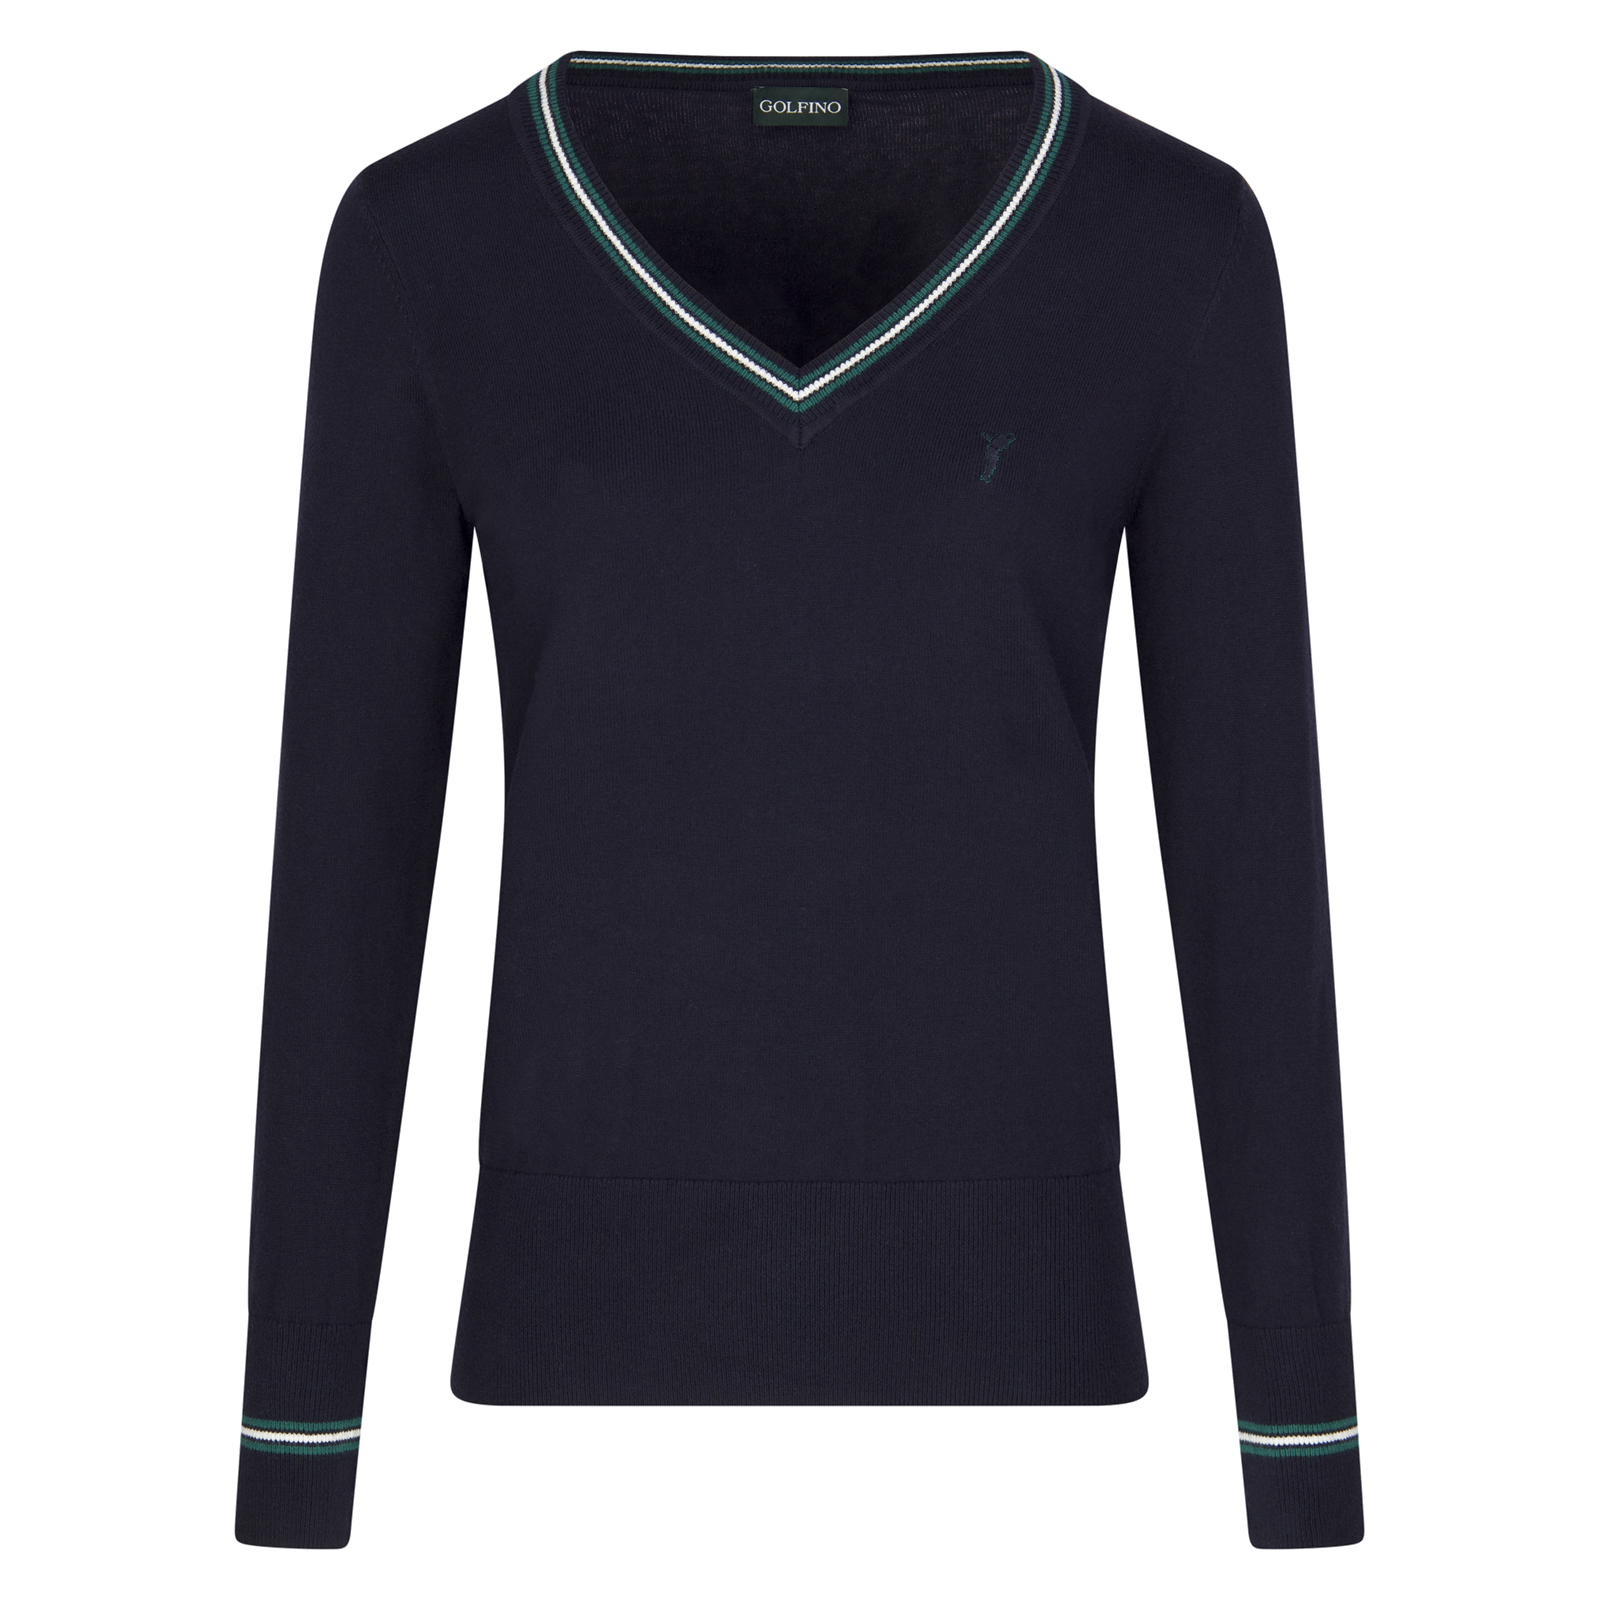 Ladies' V-neck golf sweater with cashmere